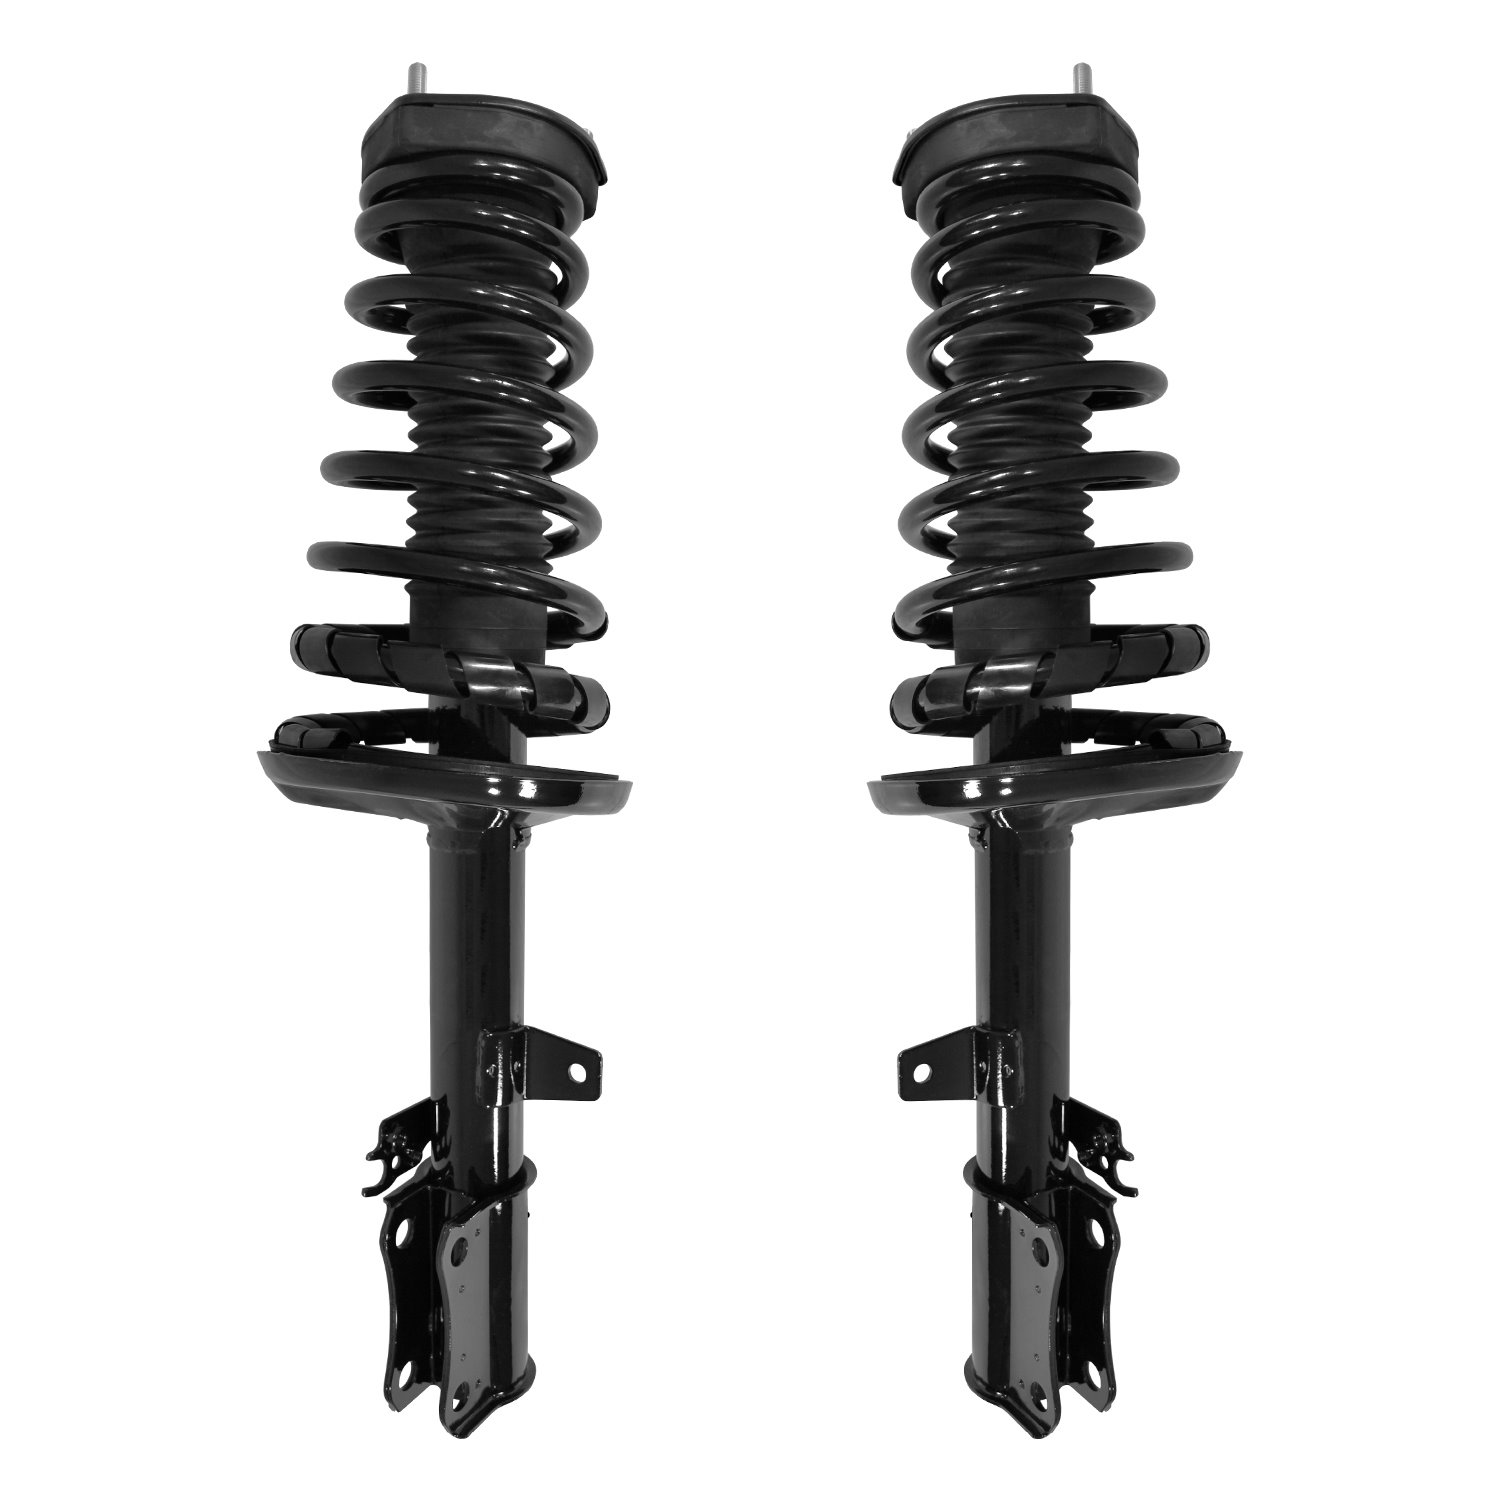 2-15321-15322-001 Suspension Strut & Coil Spring Assembly Set Fits Select Toyota Camry